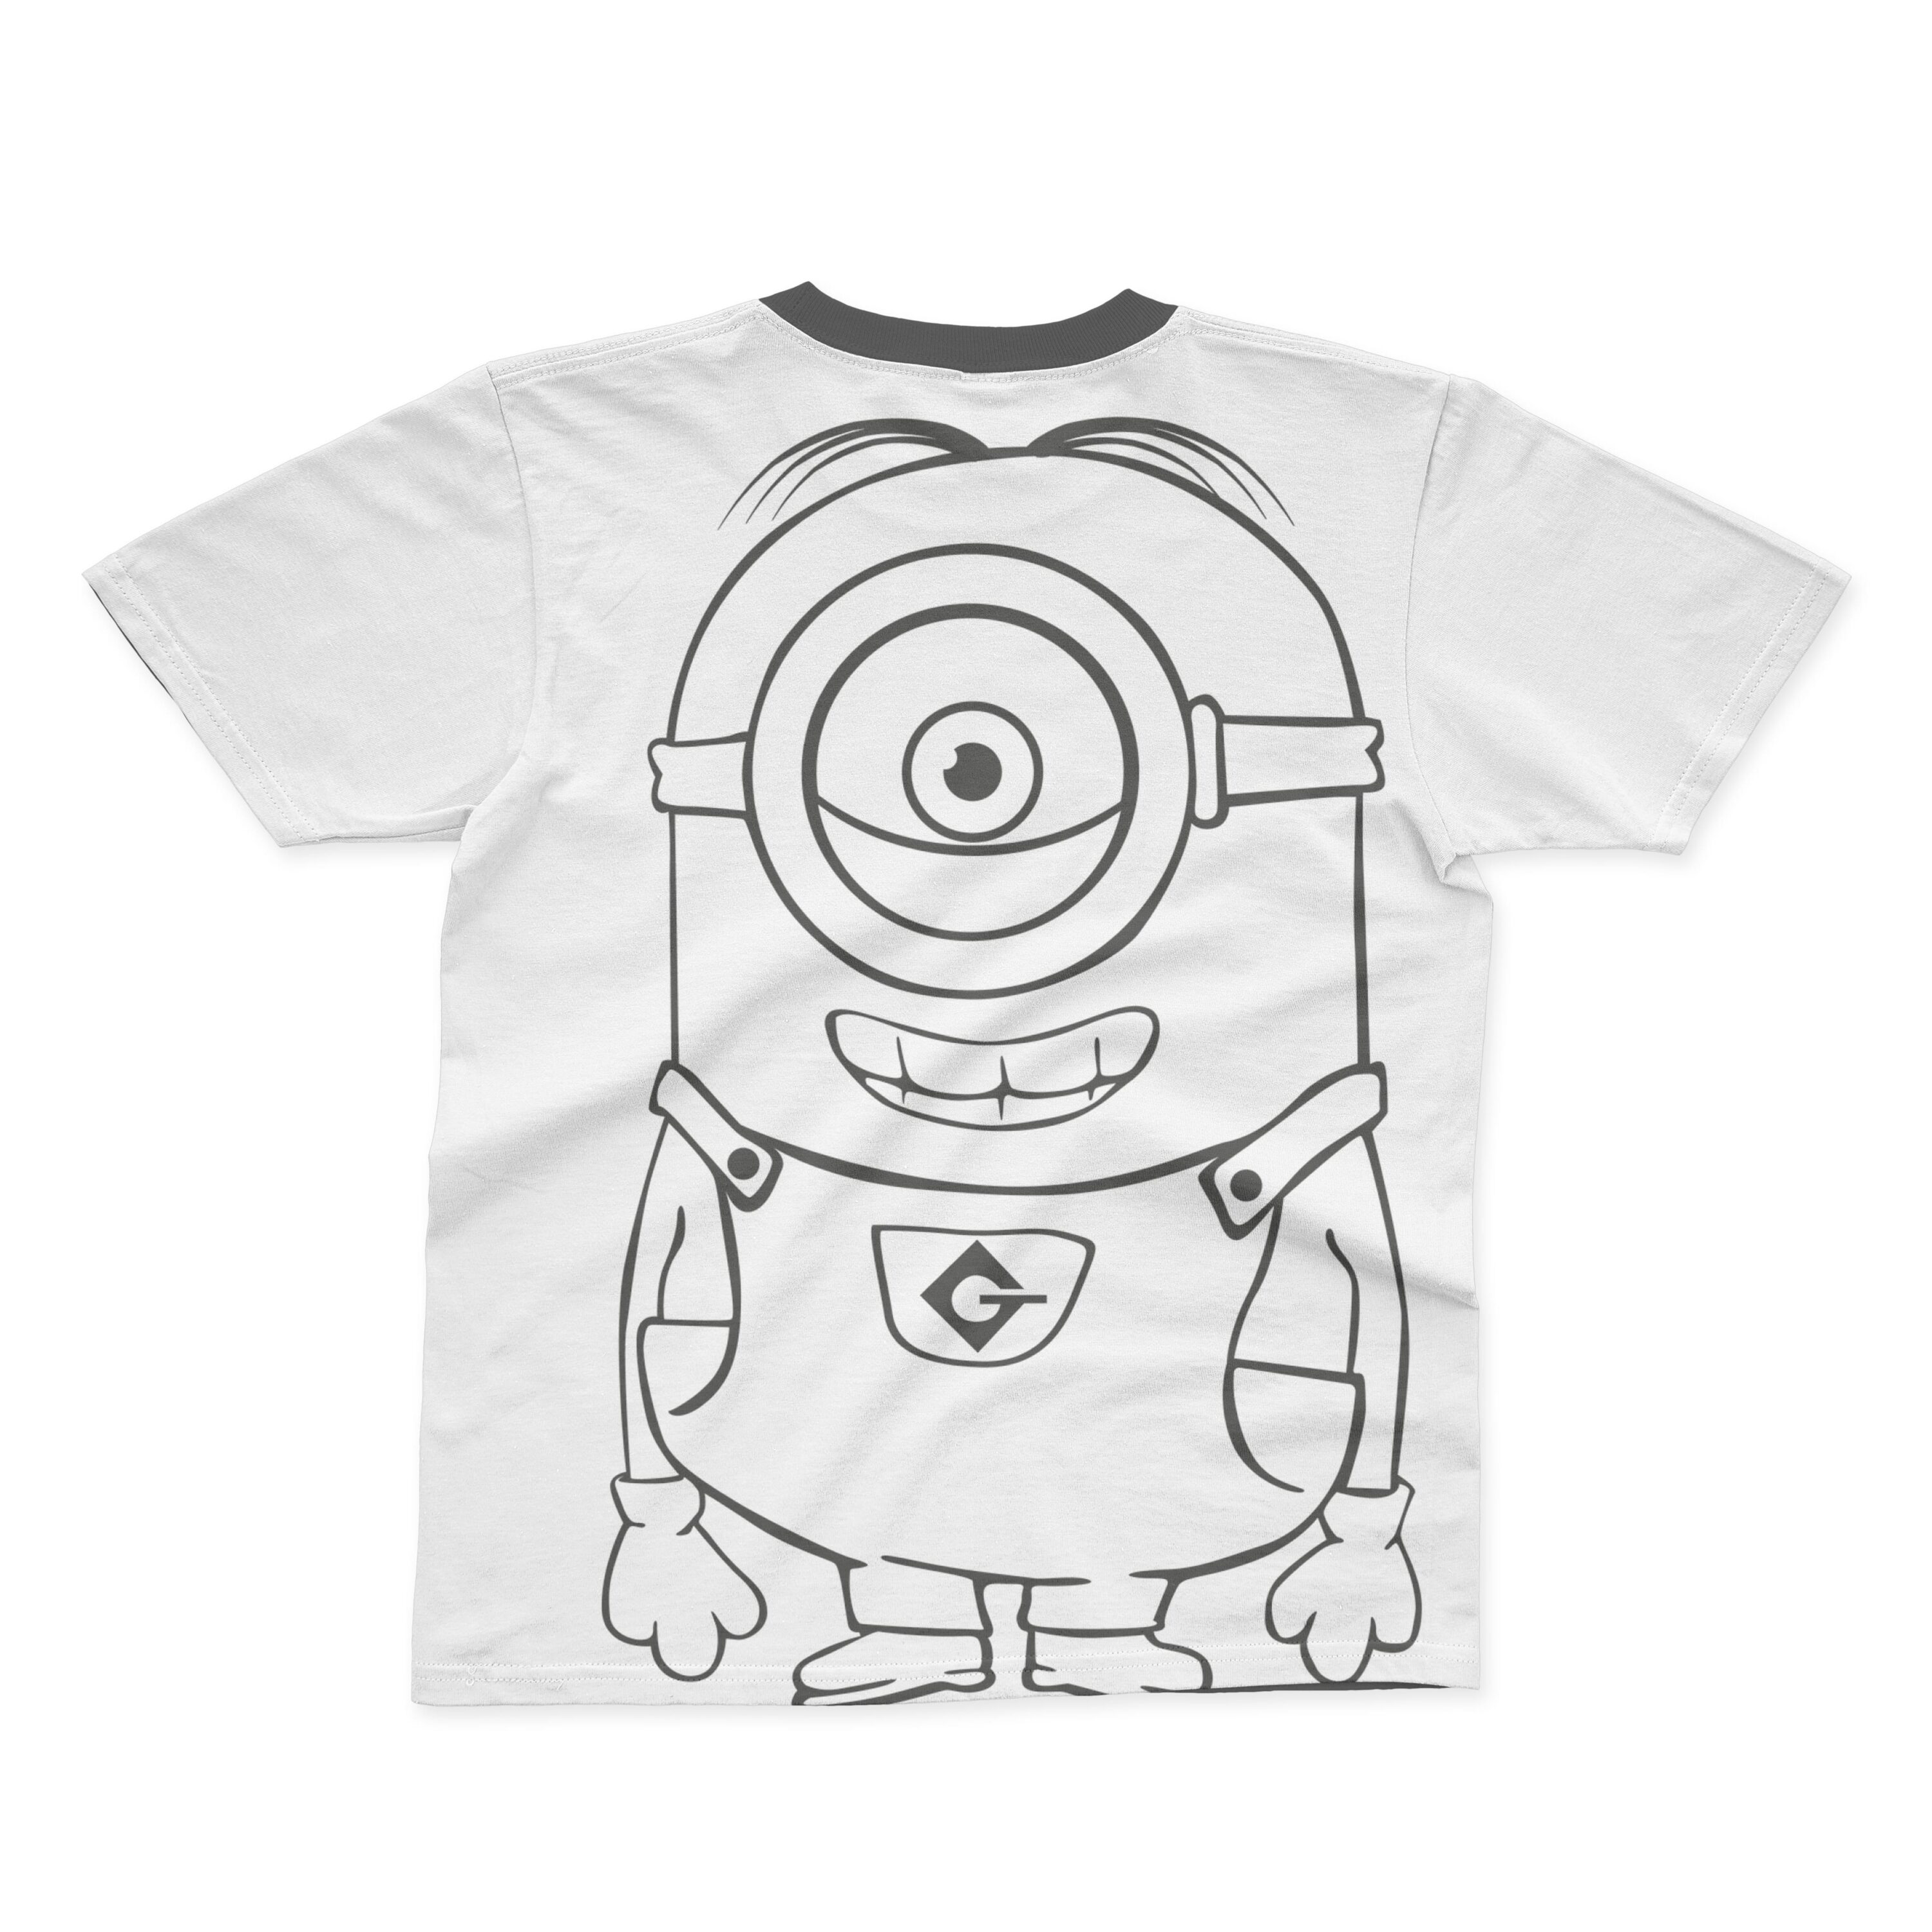 A white T-shirt with a black collar and an outline of a smiling minion with one eye.